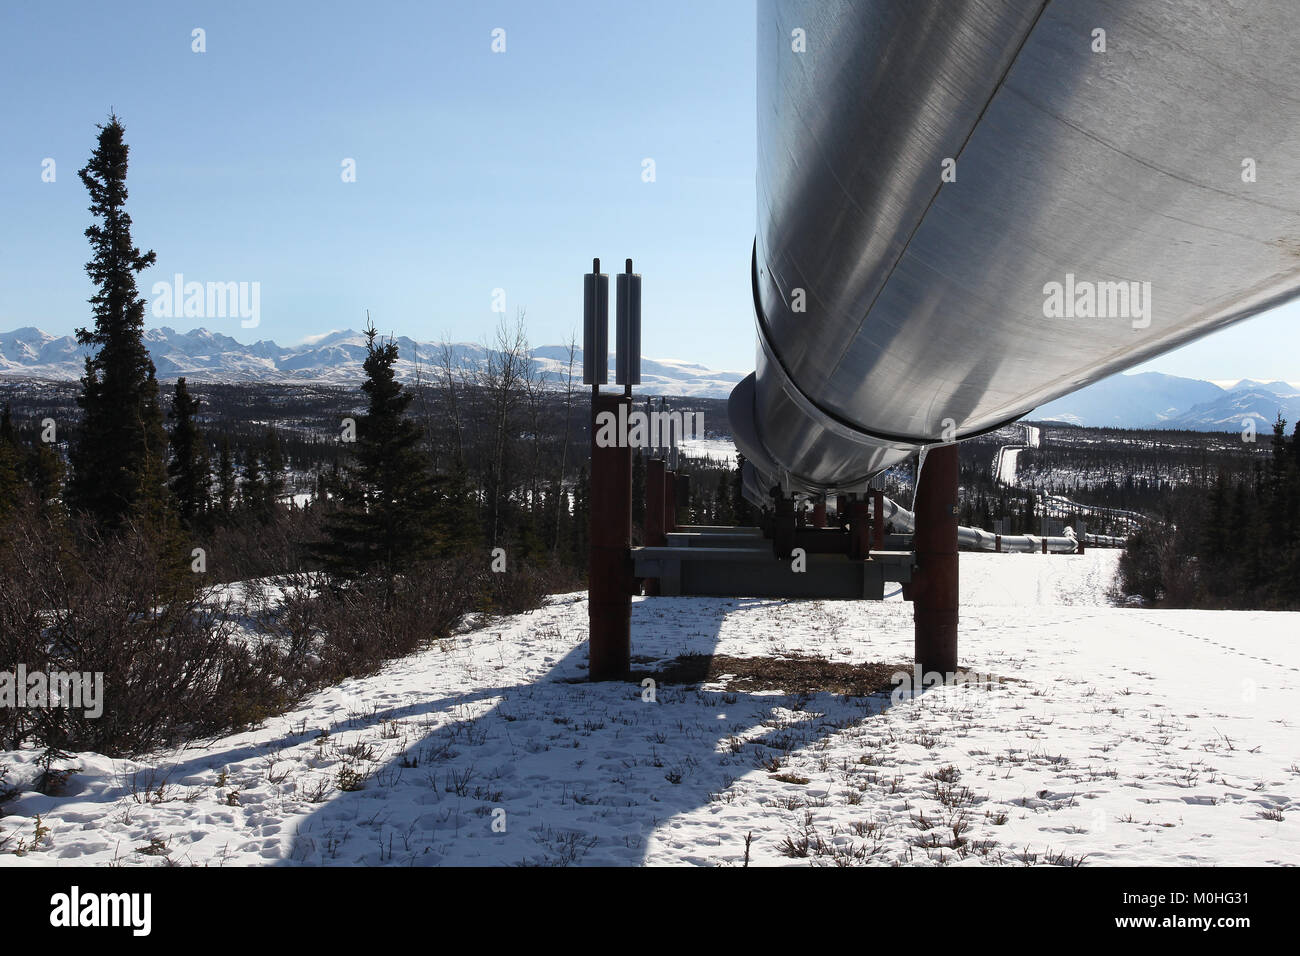 The Trans-Alaska Pipeline System along the Richardson Highway in Alaska. the pipeline moves crude oil from Prudhoe Bay to Valdez. Stock Photo